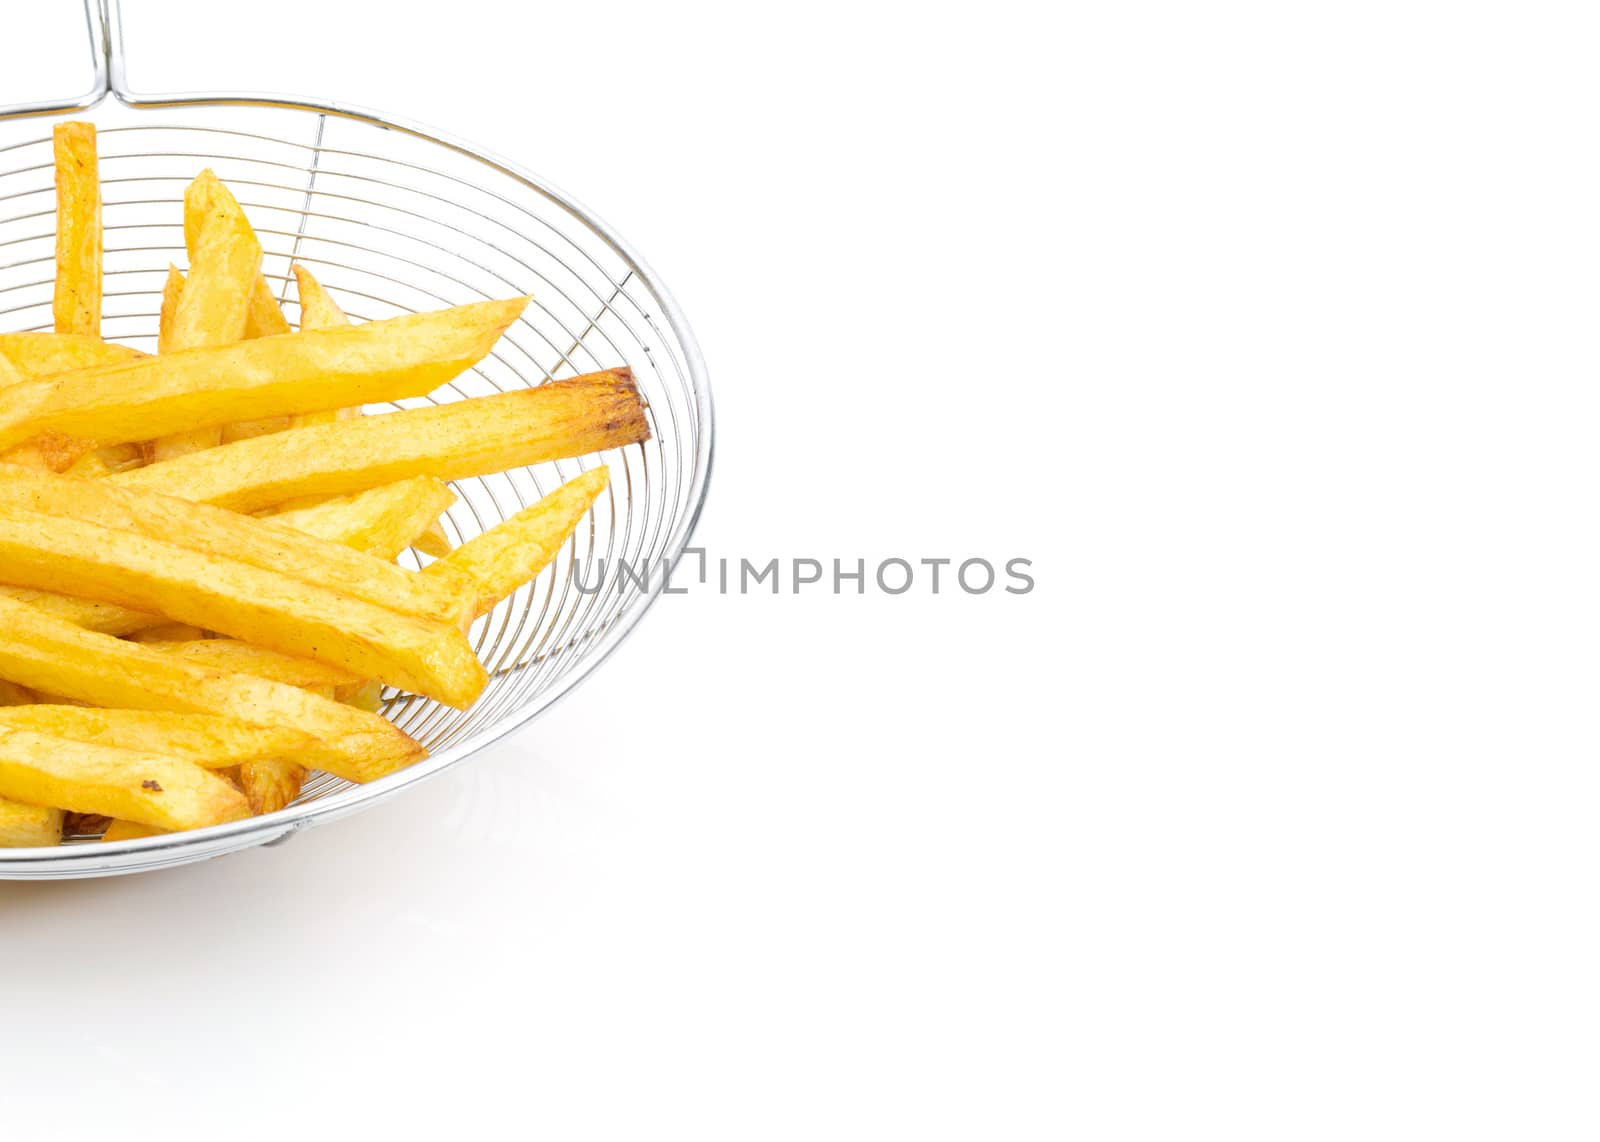 Potato french fries on a white background and free space